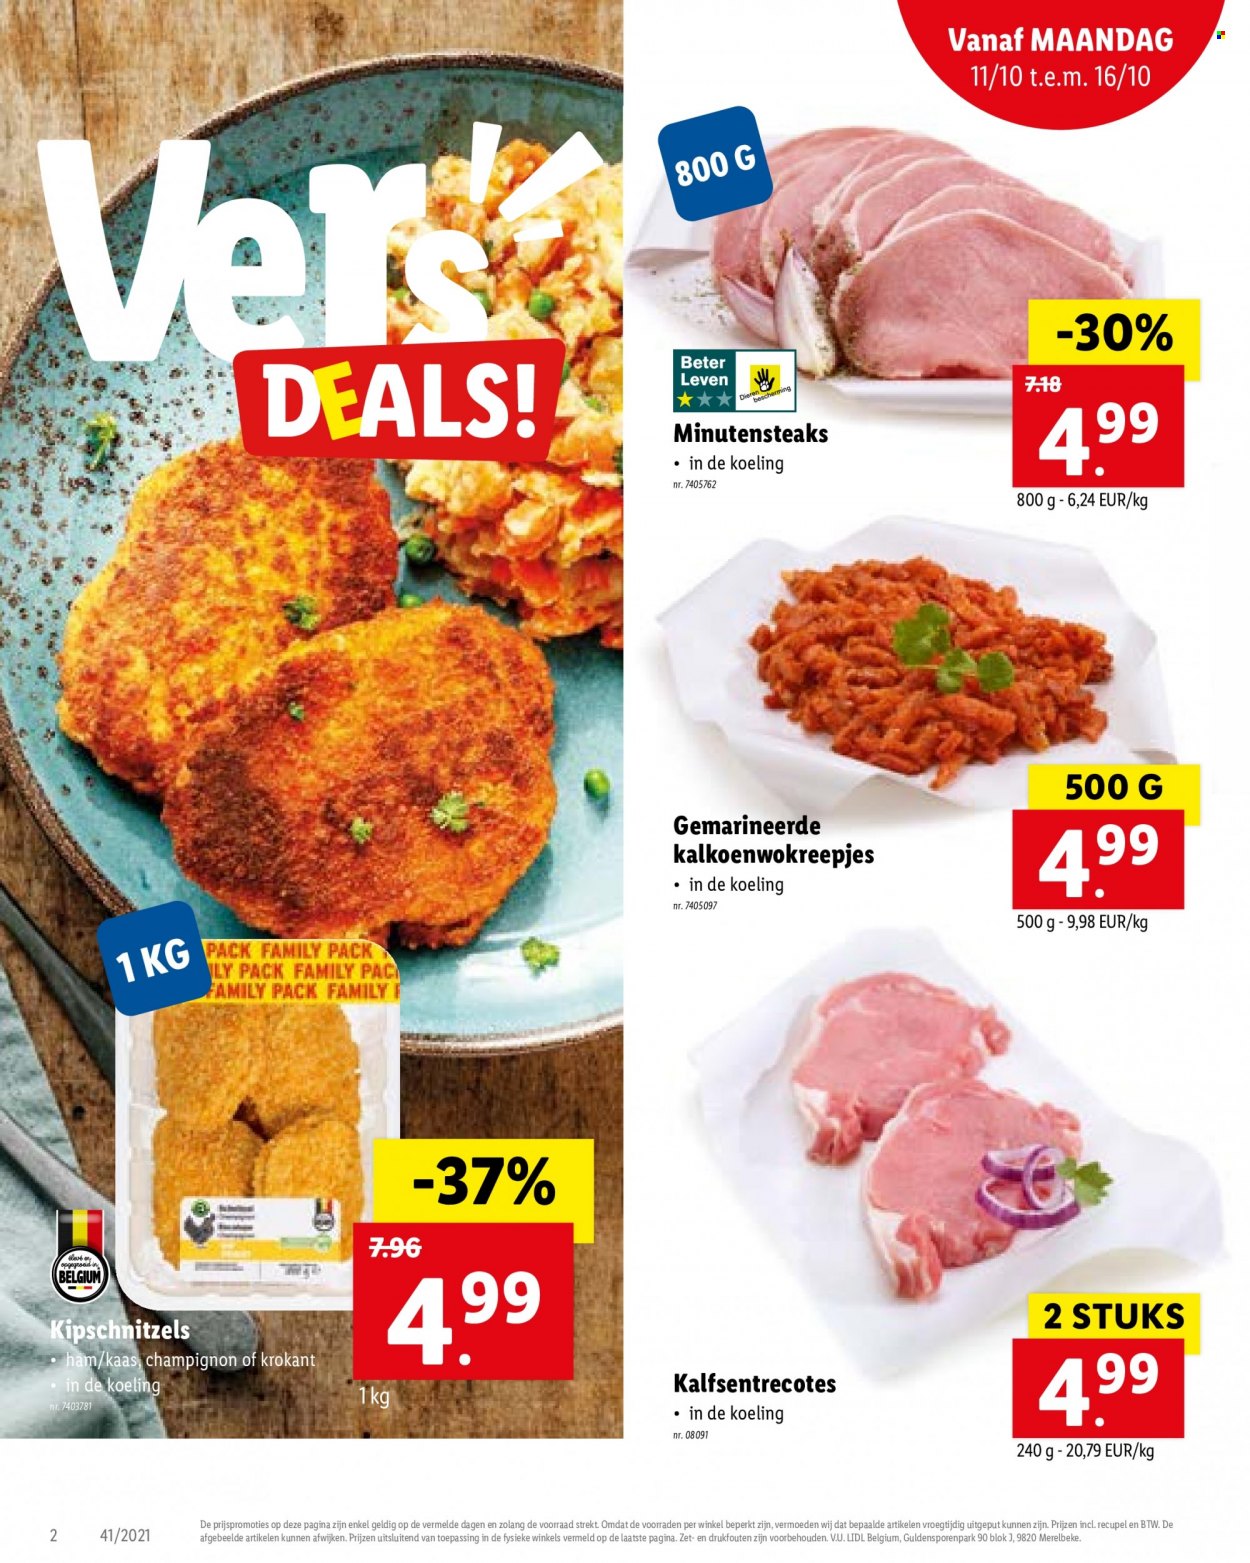 Catalogue Lidl - 11.10.2021 - 16.10.2021. Page 2.